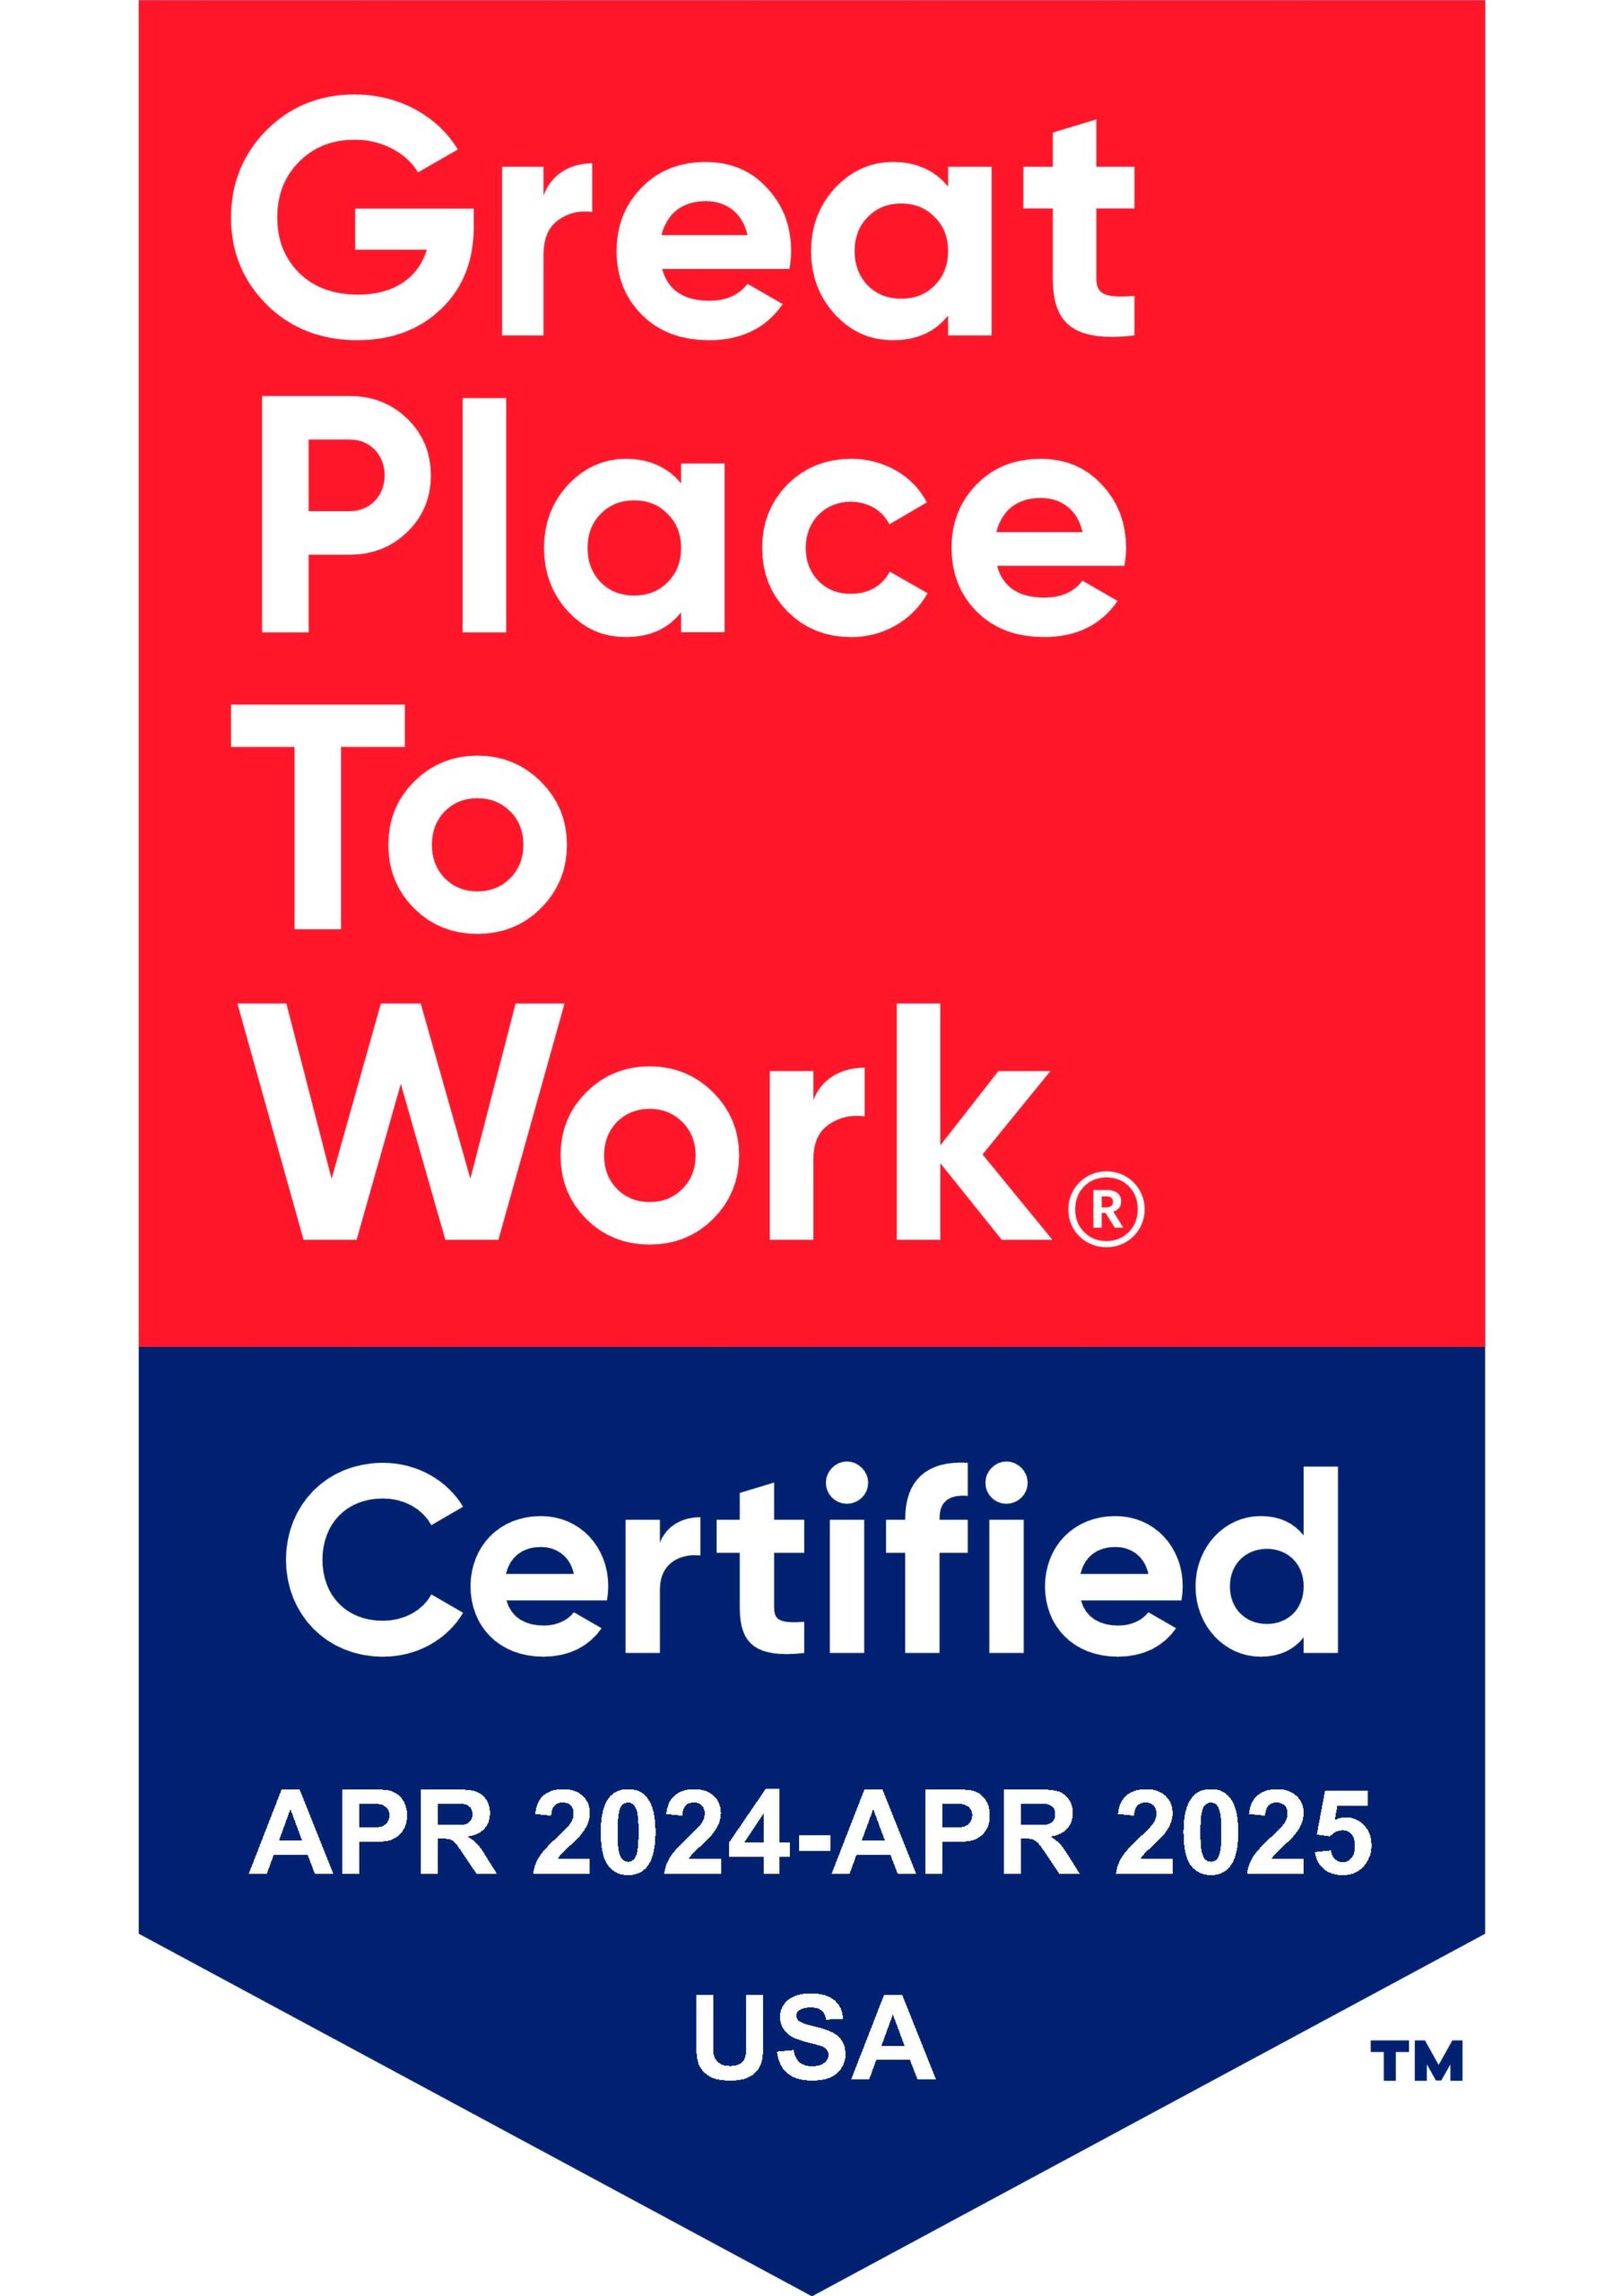 Great Place to Work Certified 2023-2025